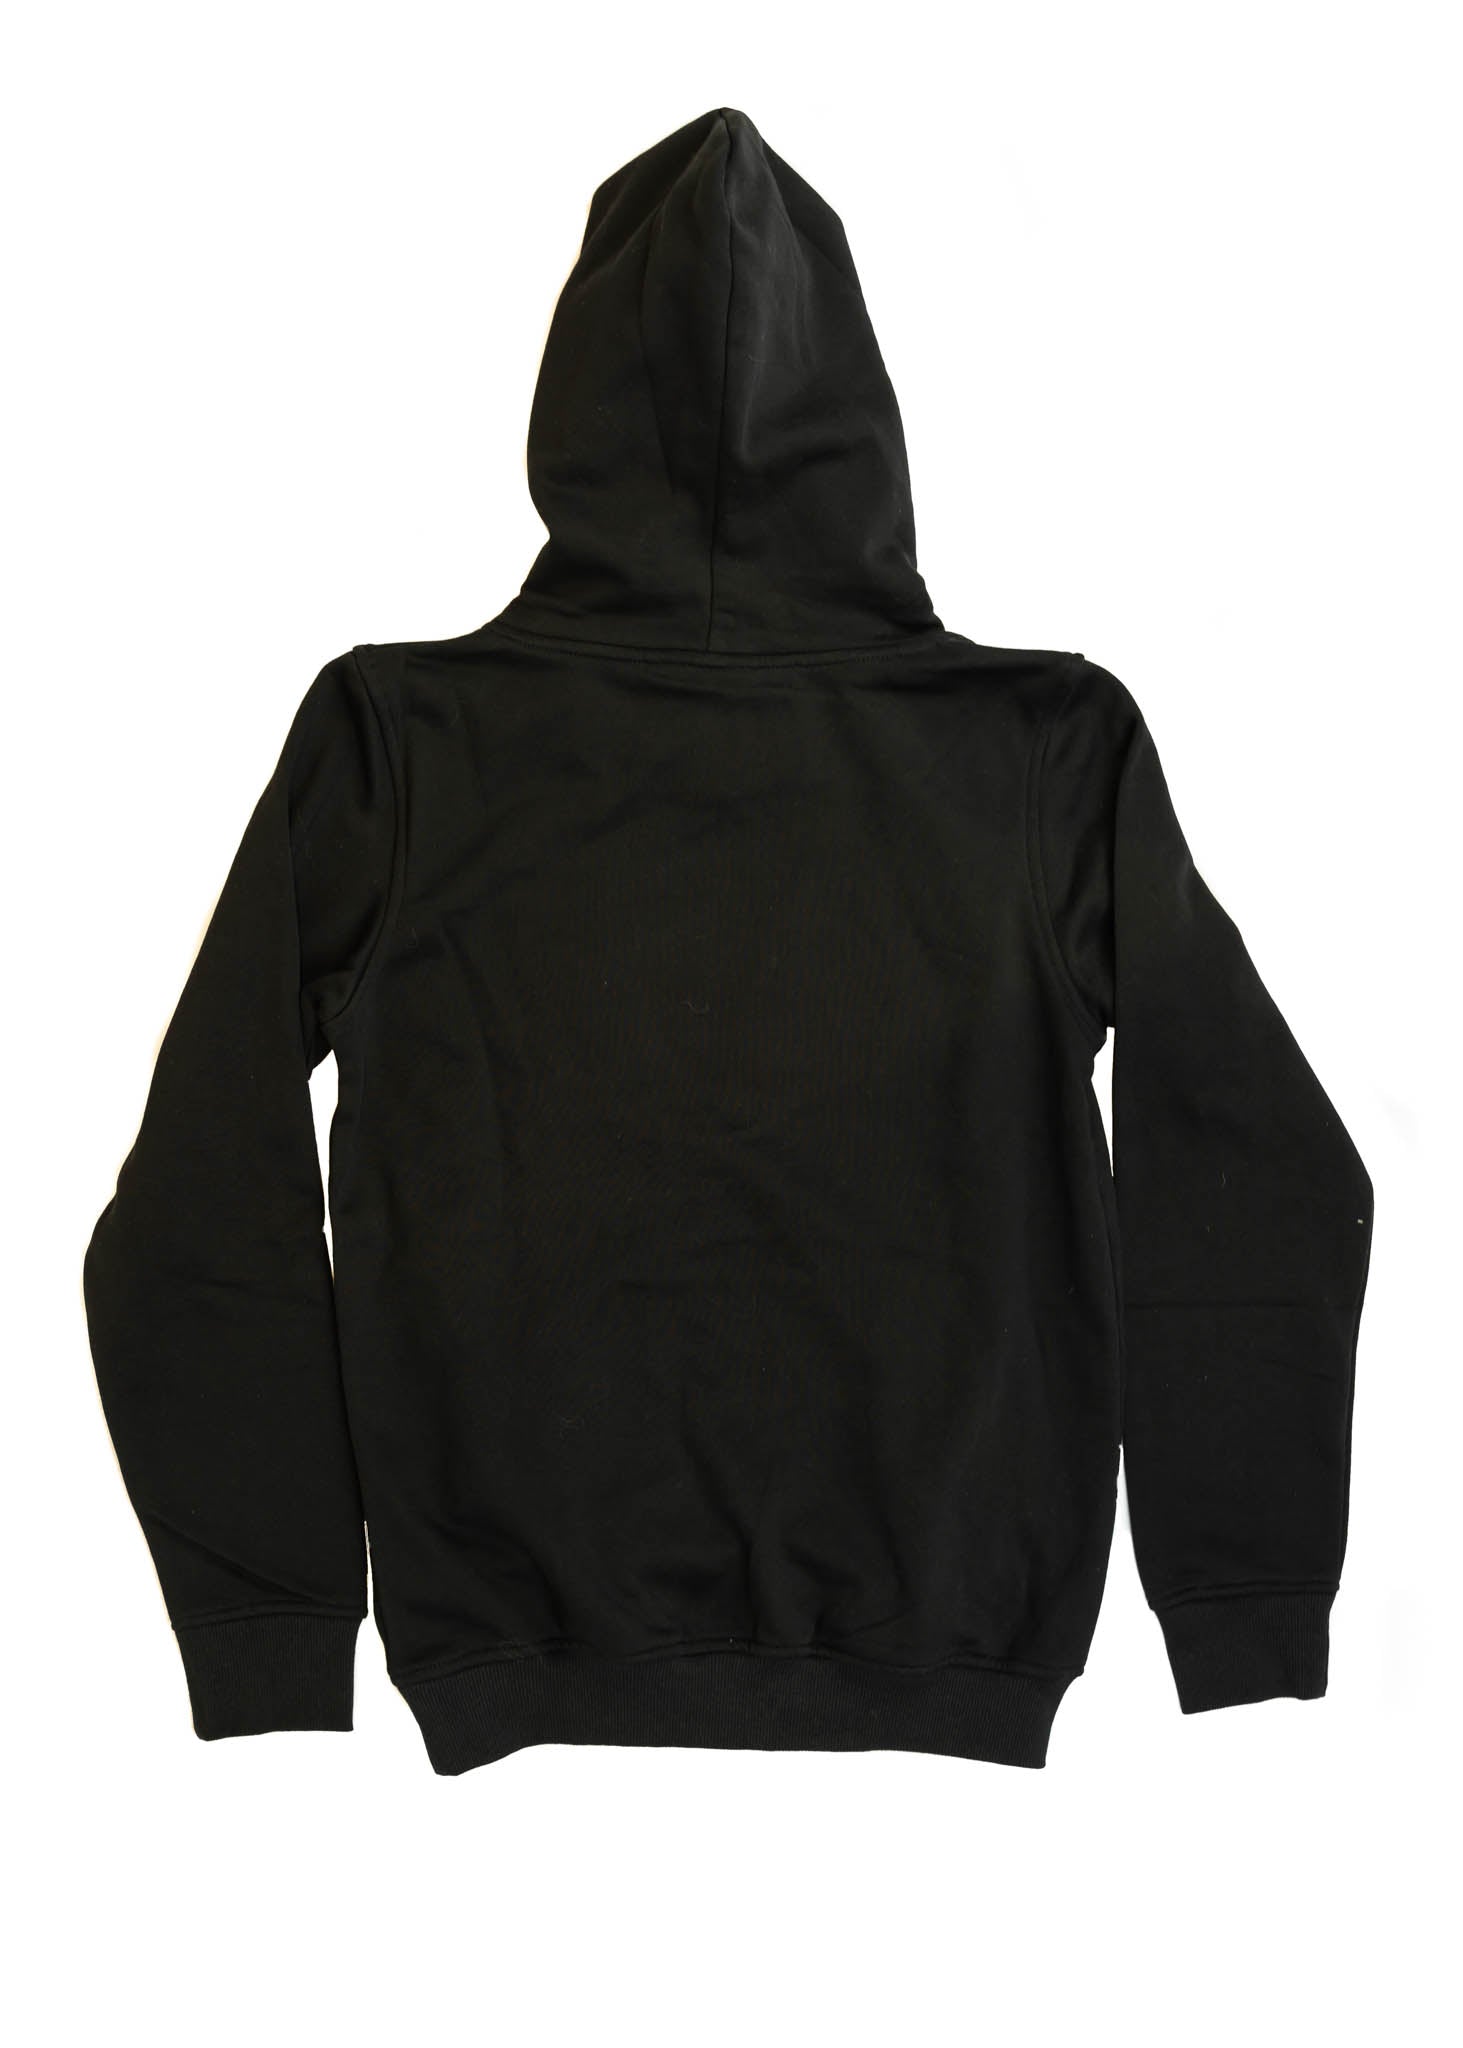 A black Volvo unisex hoodie for men and women. Photo is a back view of the sweater with an embroidered Volvo 850R. Fabric composition is cotton, polyester, and rayon. The material is very soft, stretchy, and non-transparent. The style of this hoodie is long sleeve, crewneck with a hood, hooded, with embroidery on the left chest.